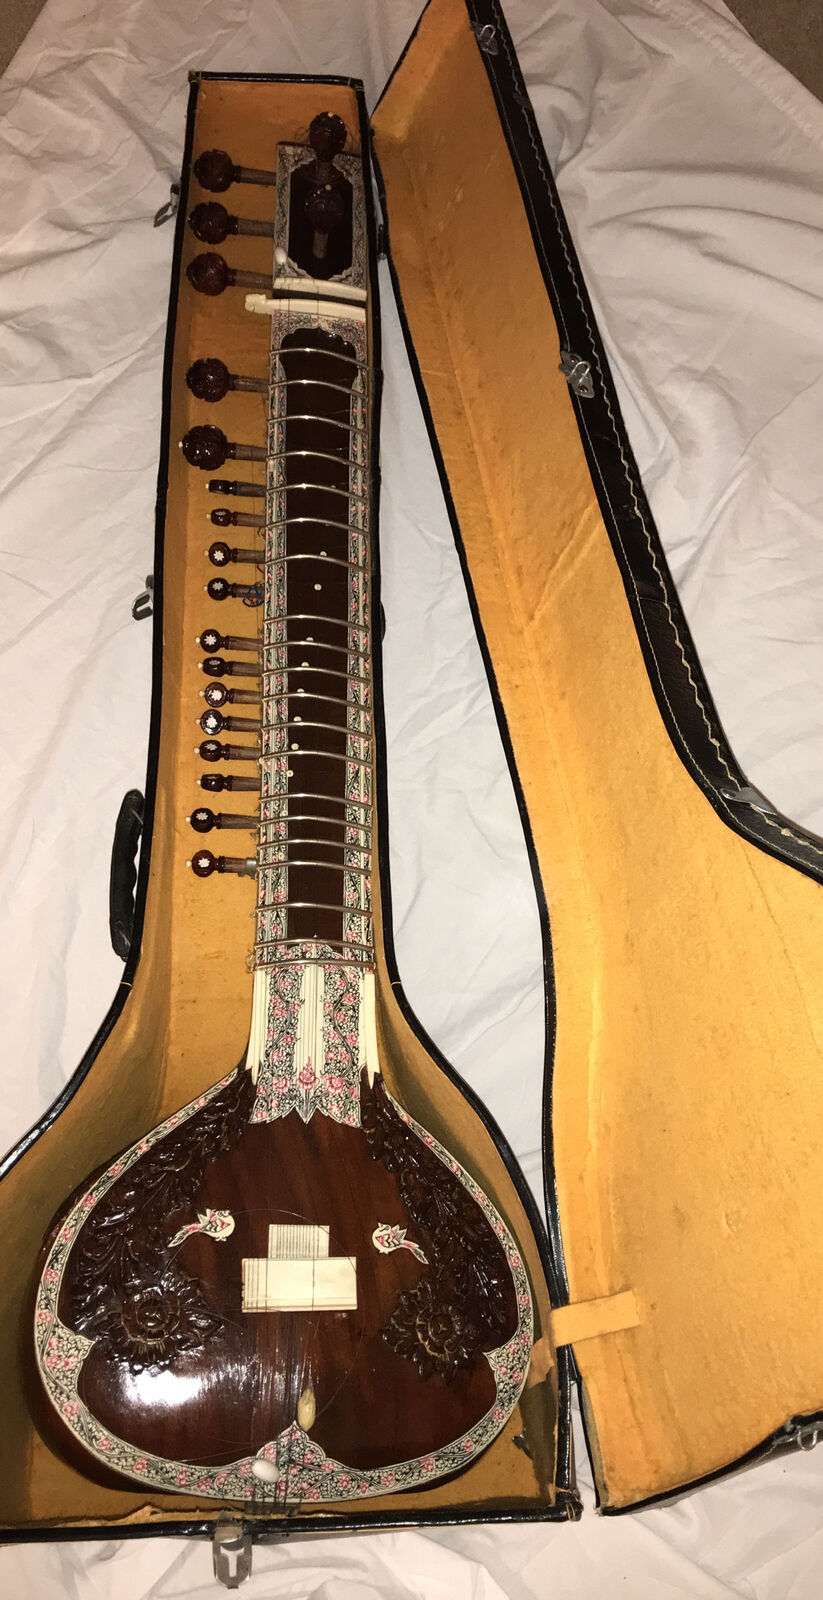 Sitar - From India - With Case 7 Main Strings And 12 Sympathetic Strings